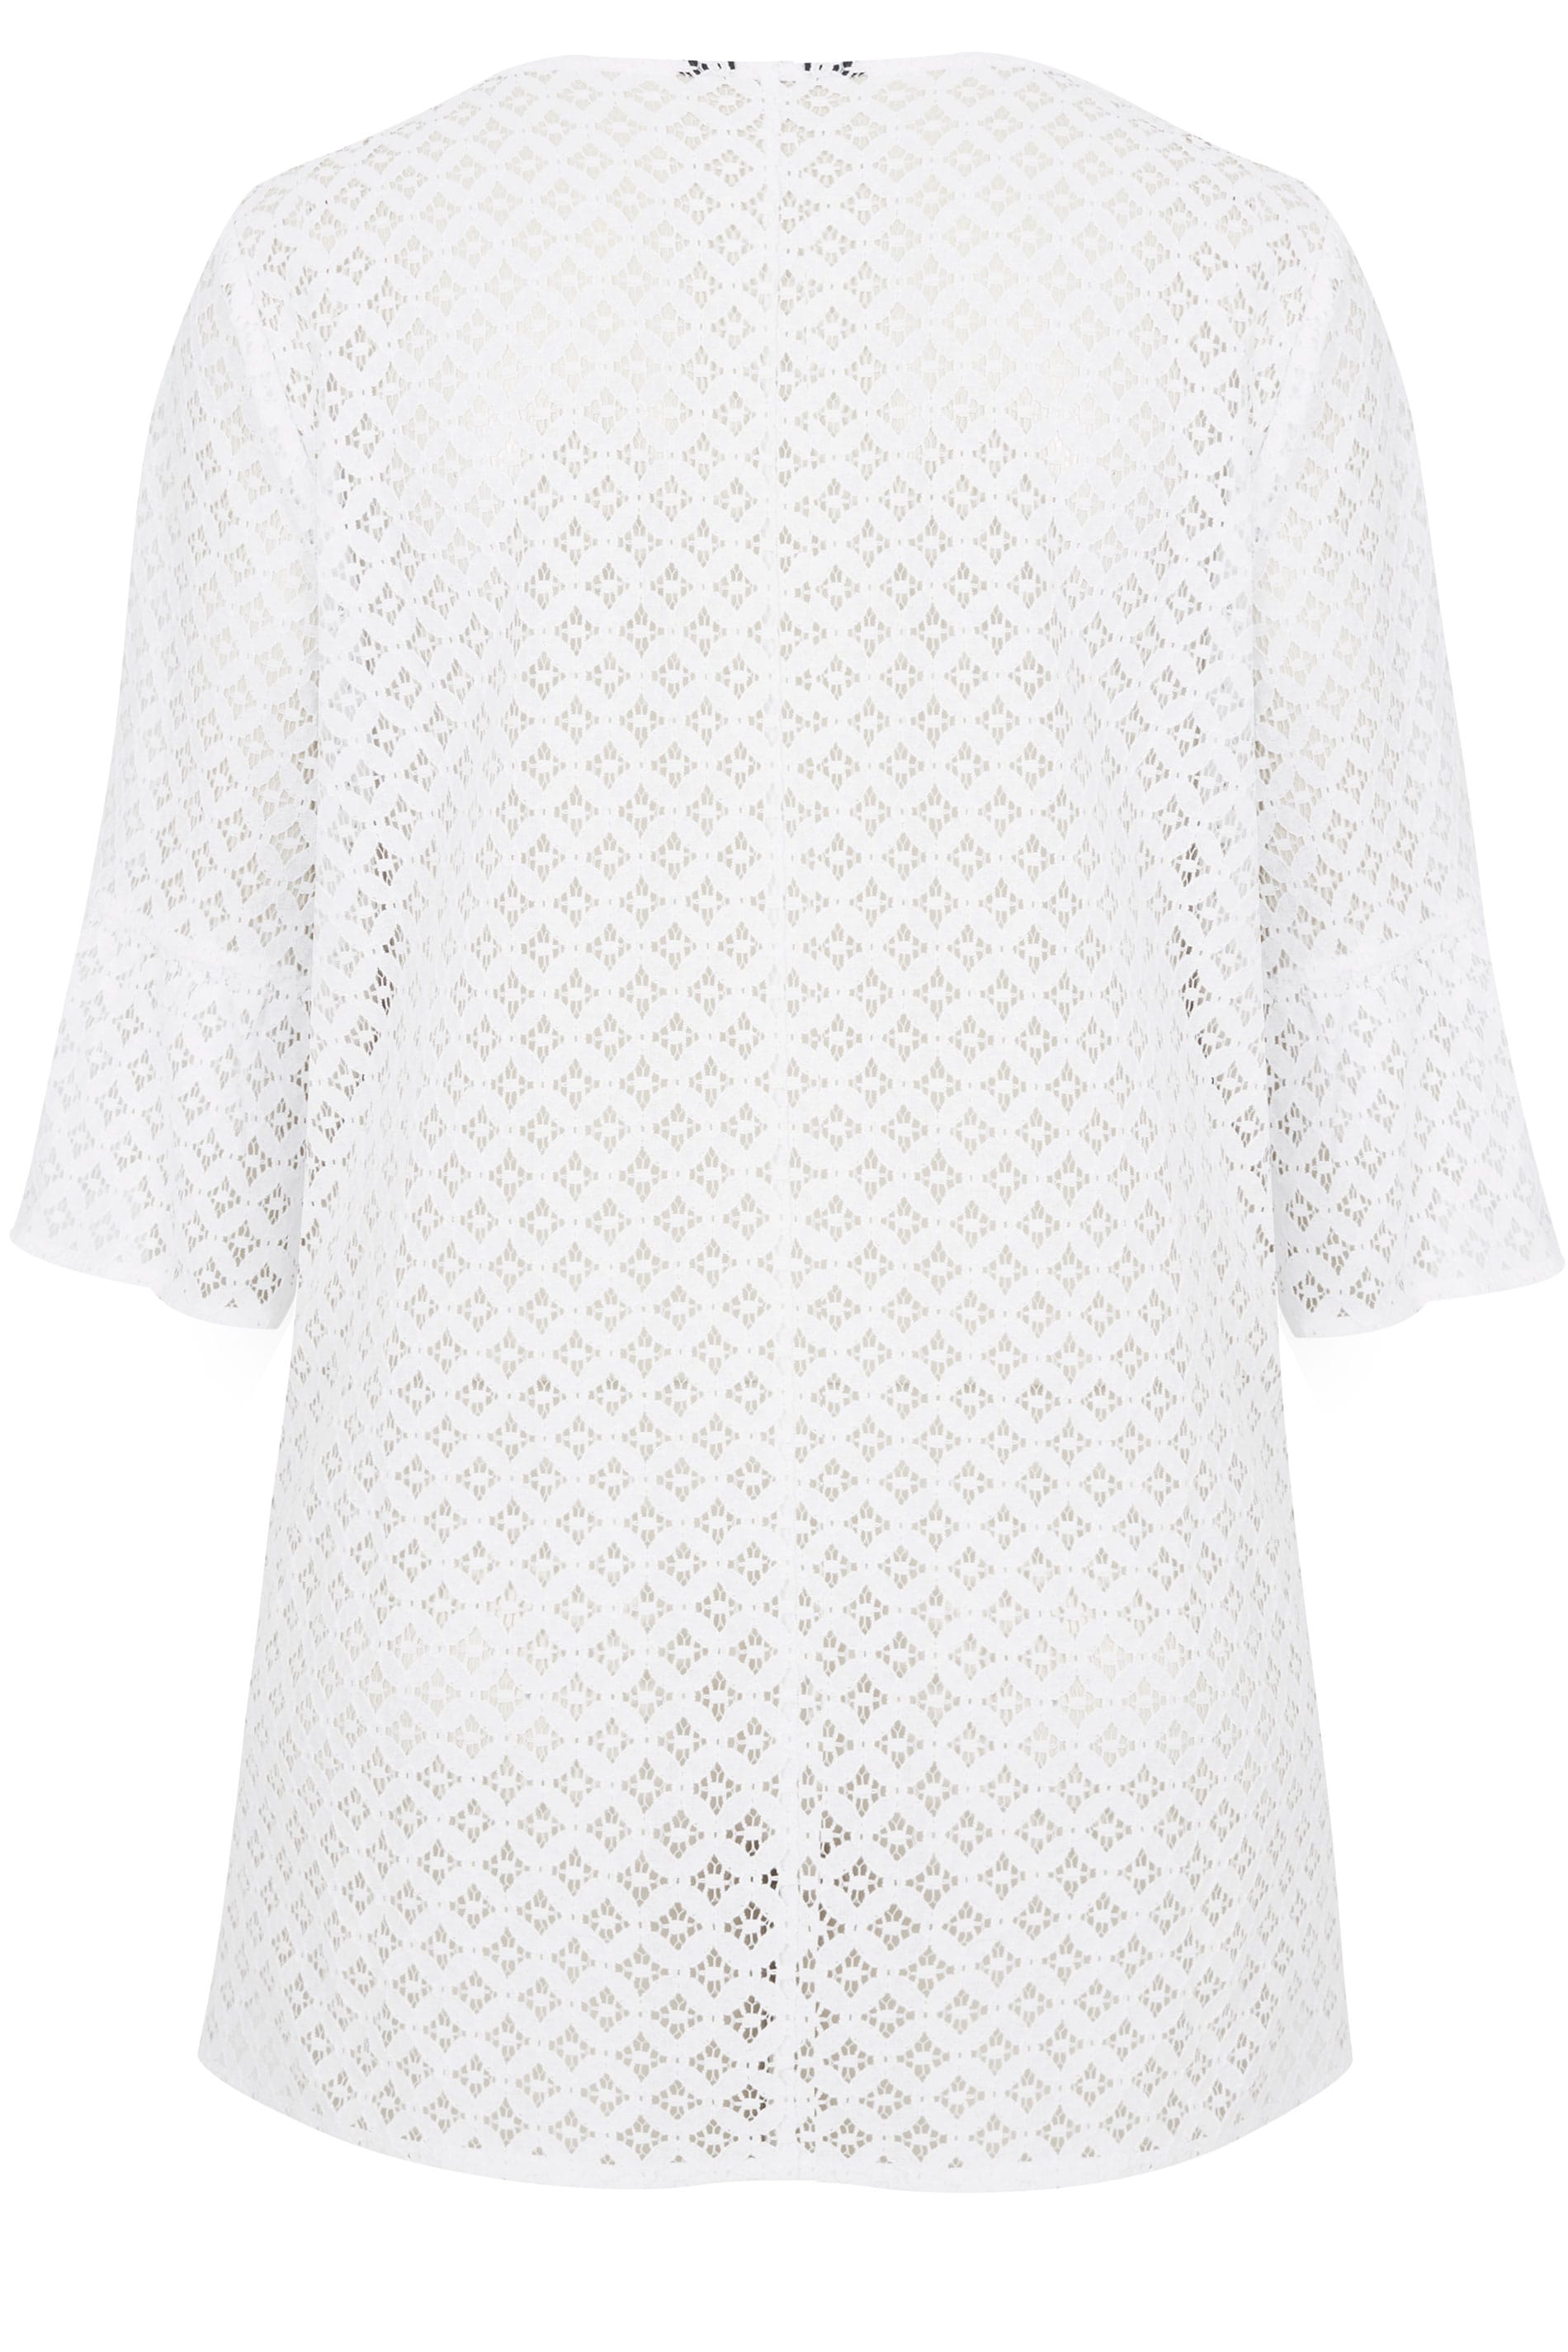 White Lace Twist Front Cover Up | Plus size 16 to 36 | Yours Clothing